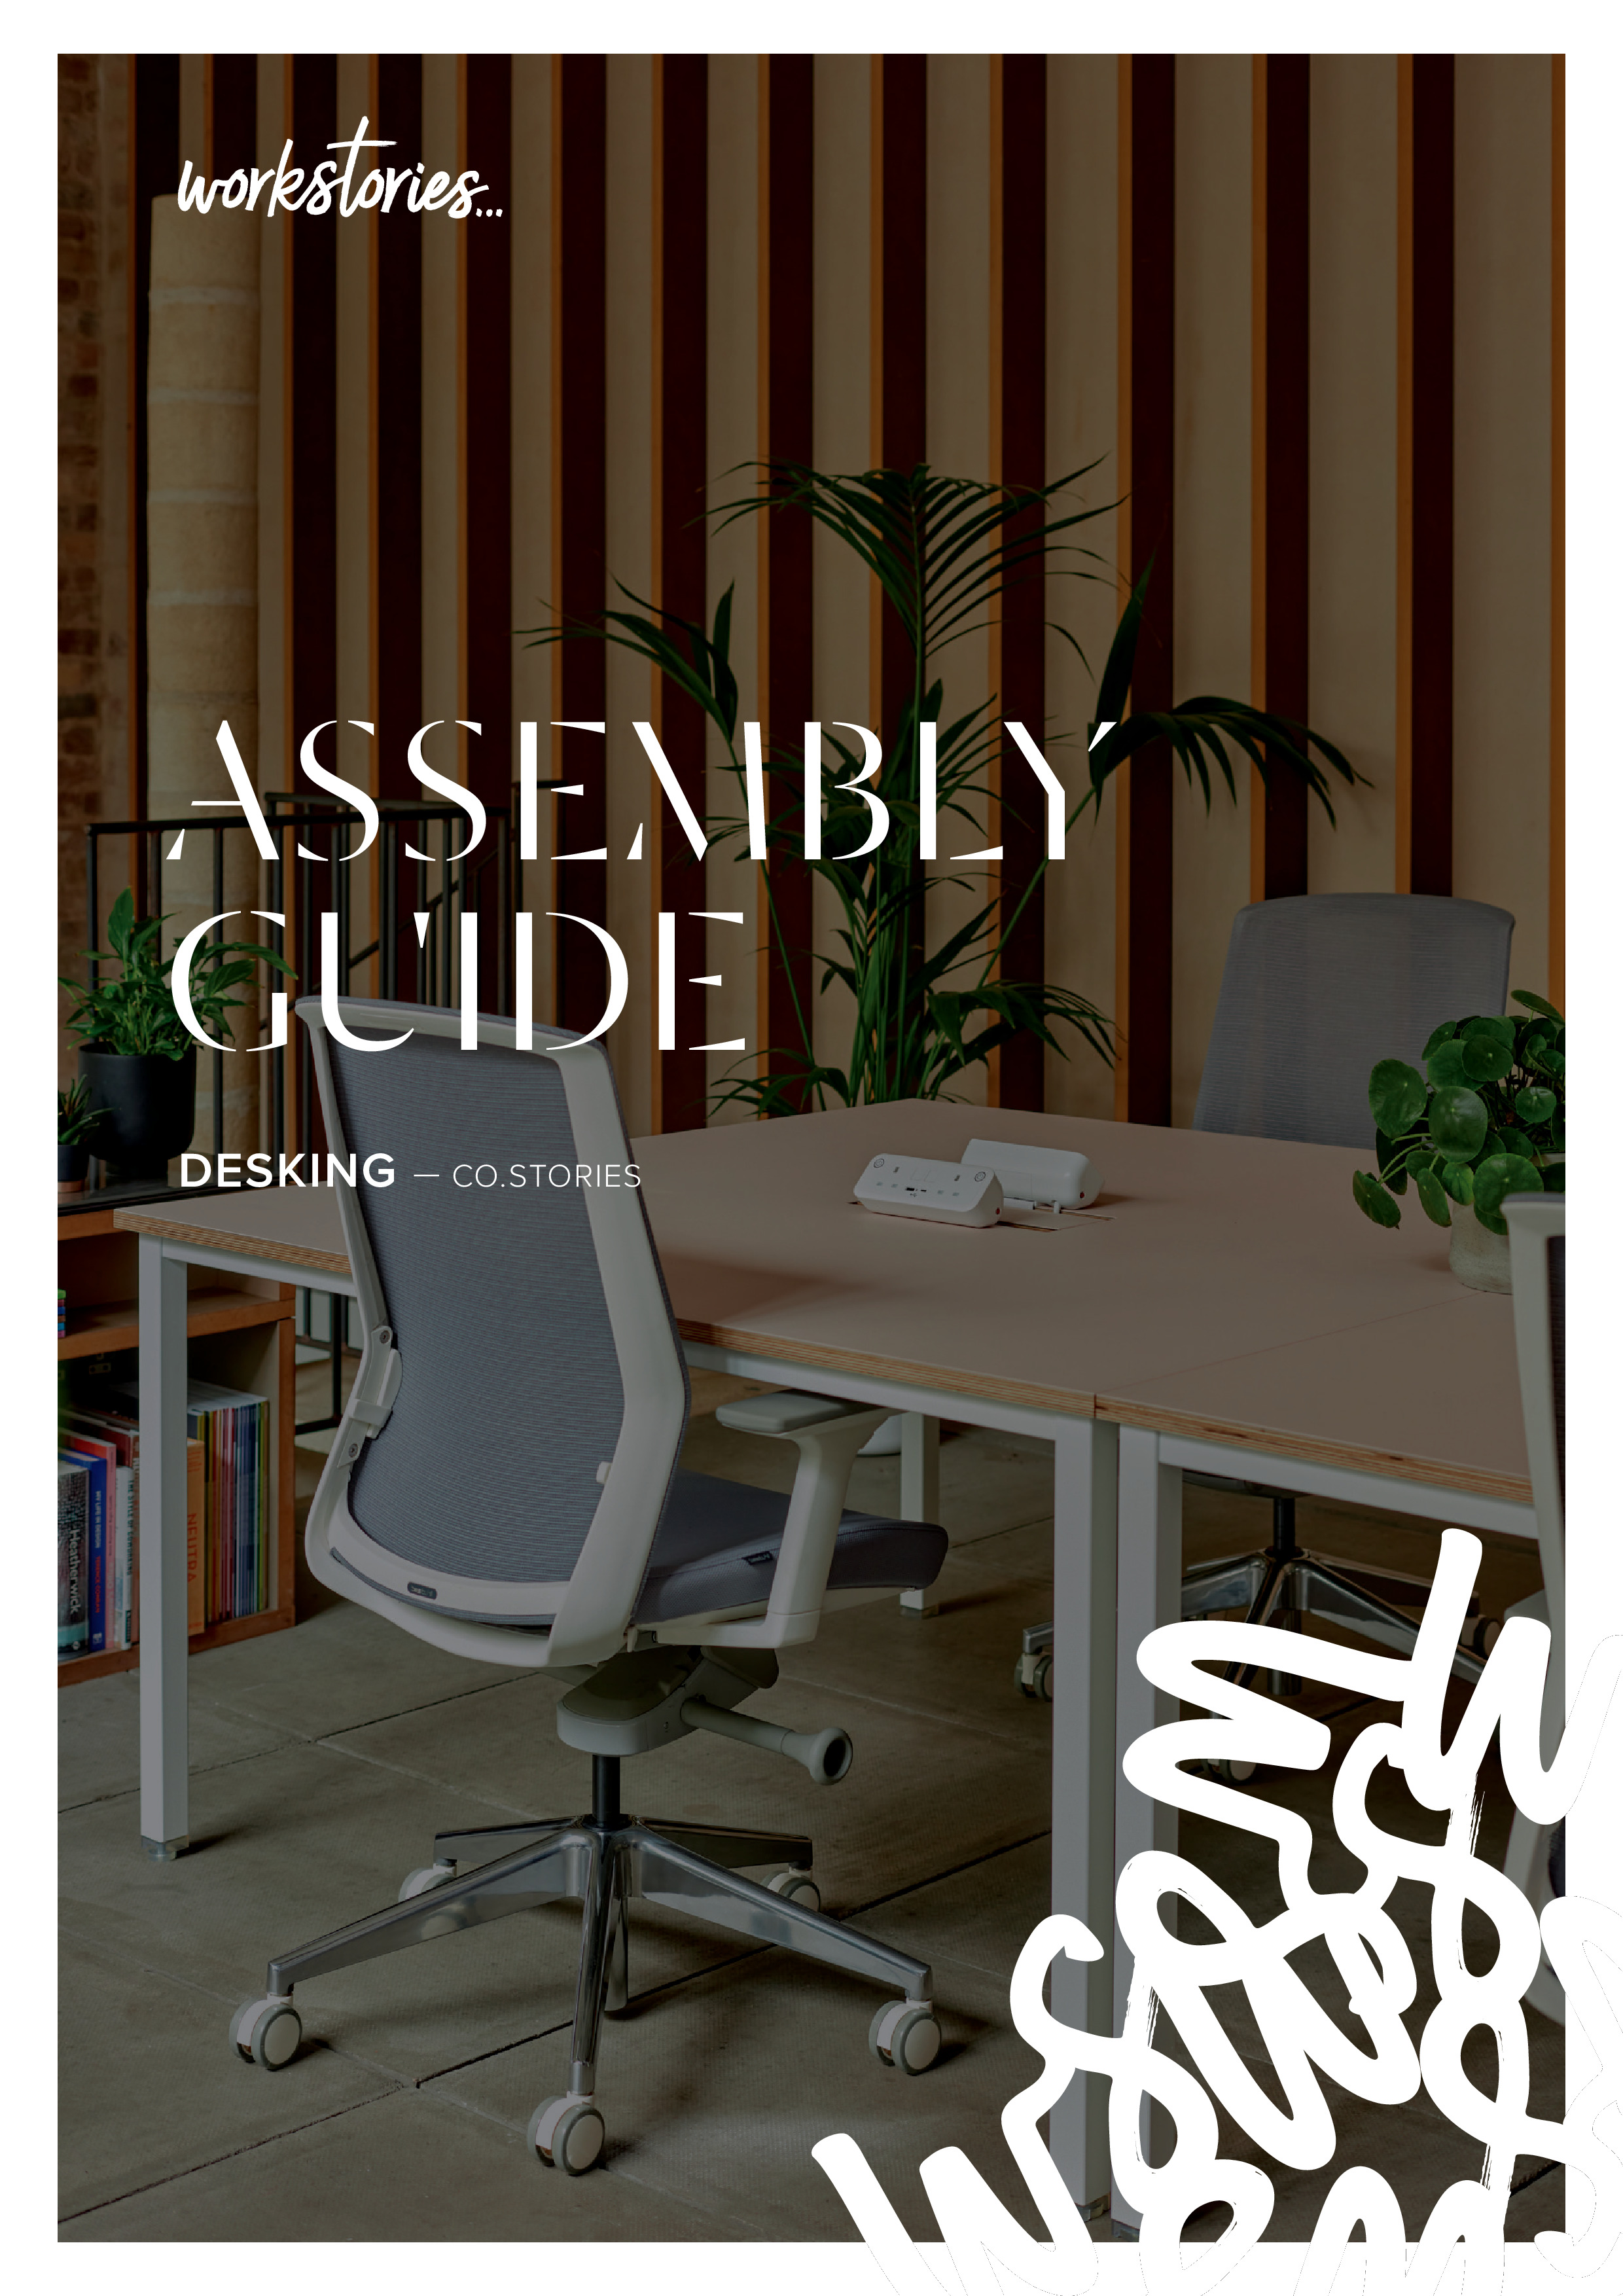 WS - ASSEMBLY GUIDE - Desking - Co.Stories